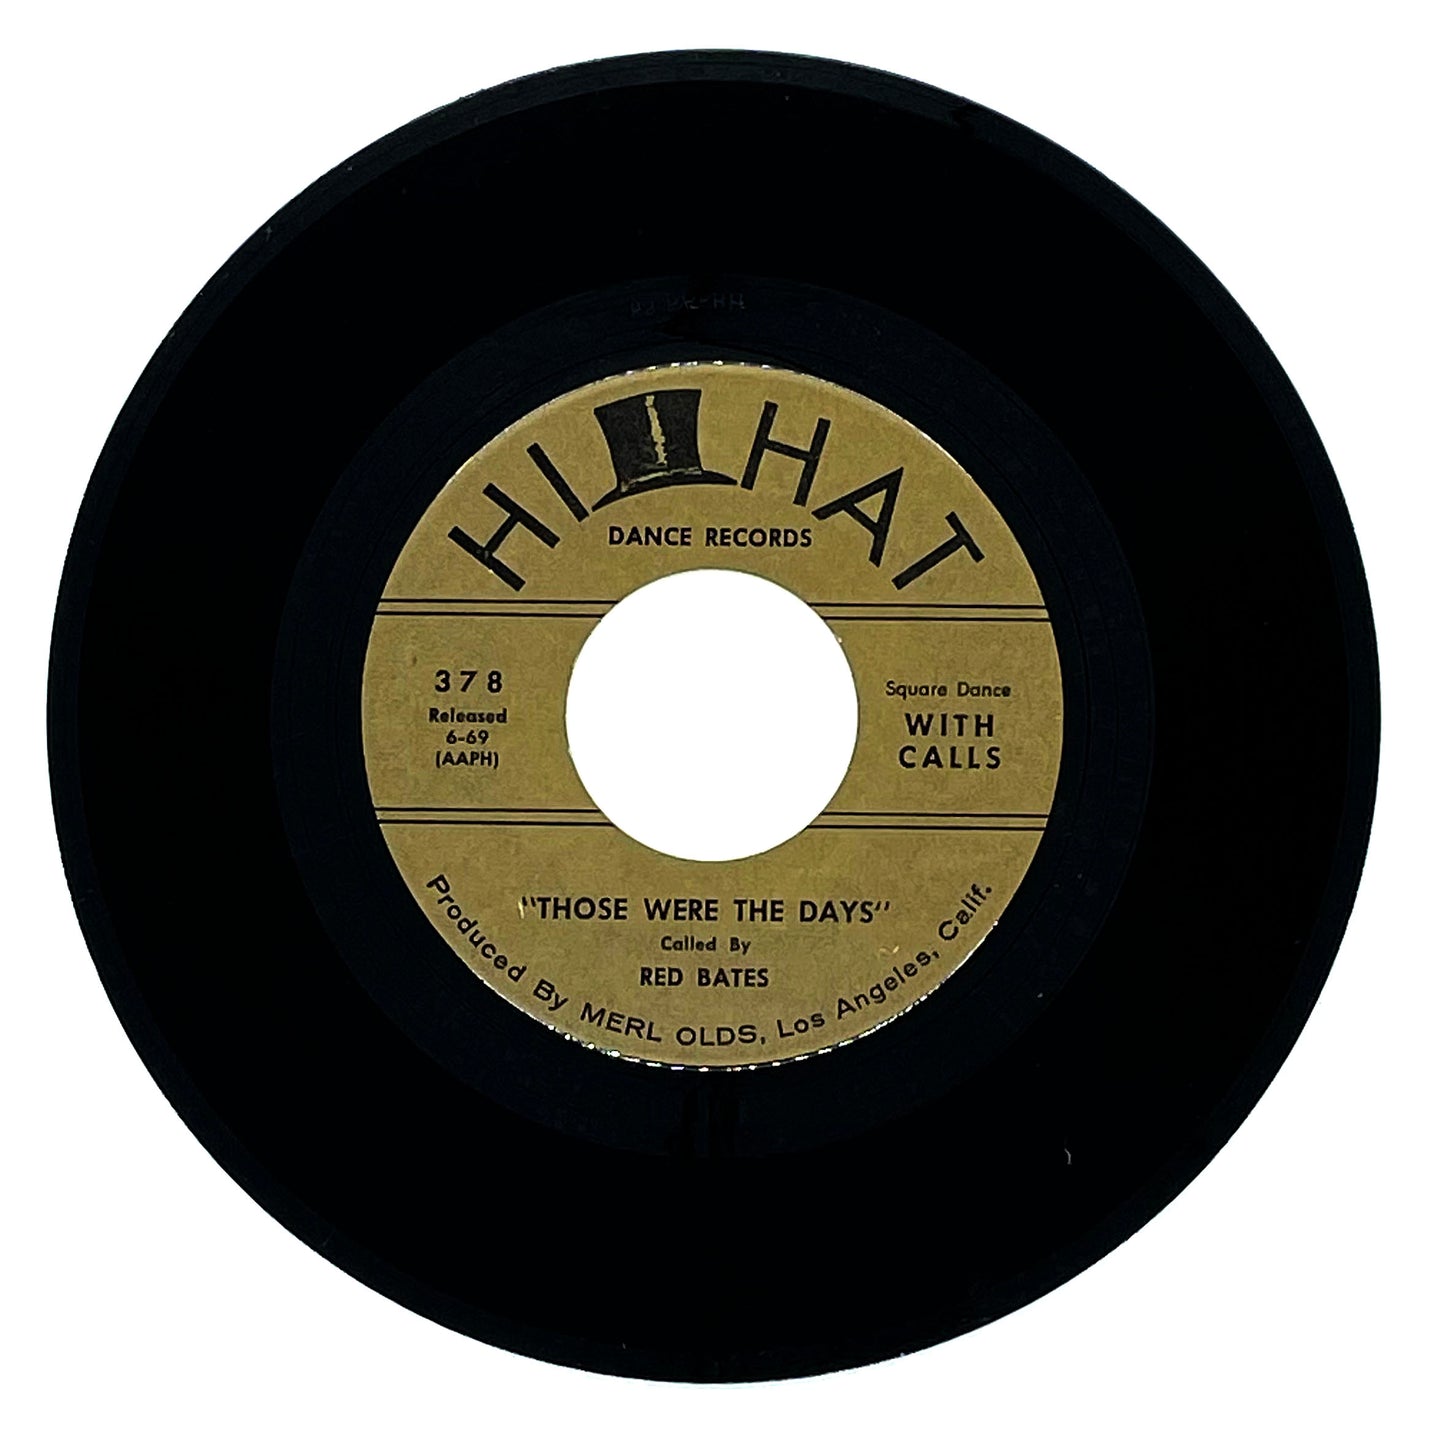 Red Bates : THOSE WERE THE DAYS/ Dick Carry : THOSE WERE THE DAYS (INSTRUMENTAL)